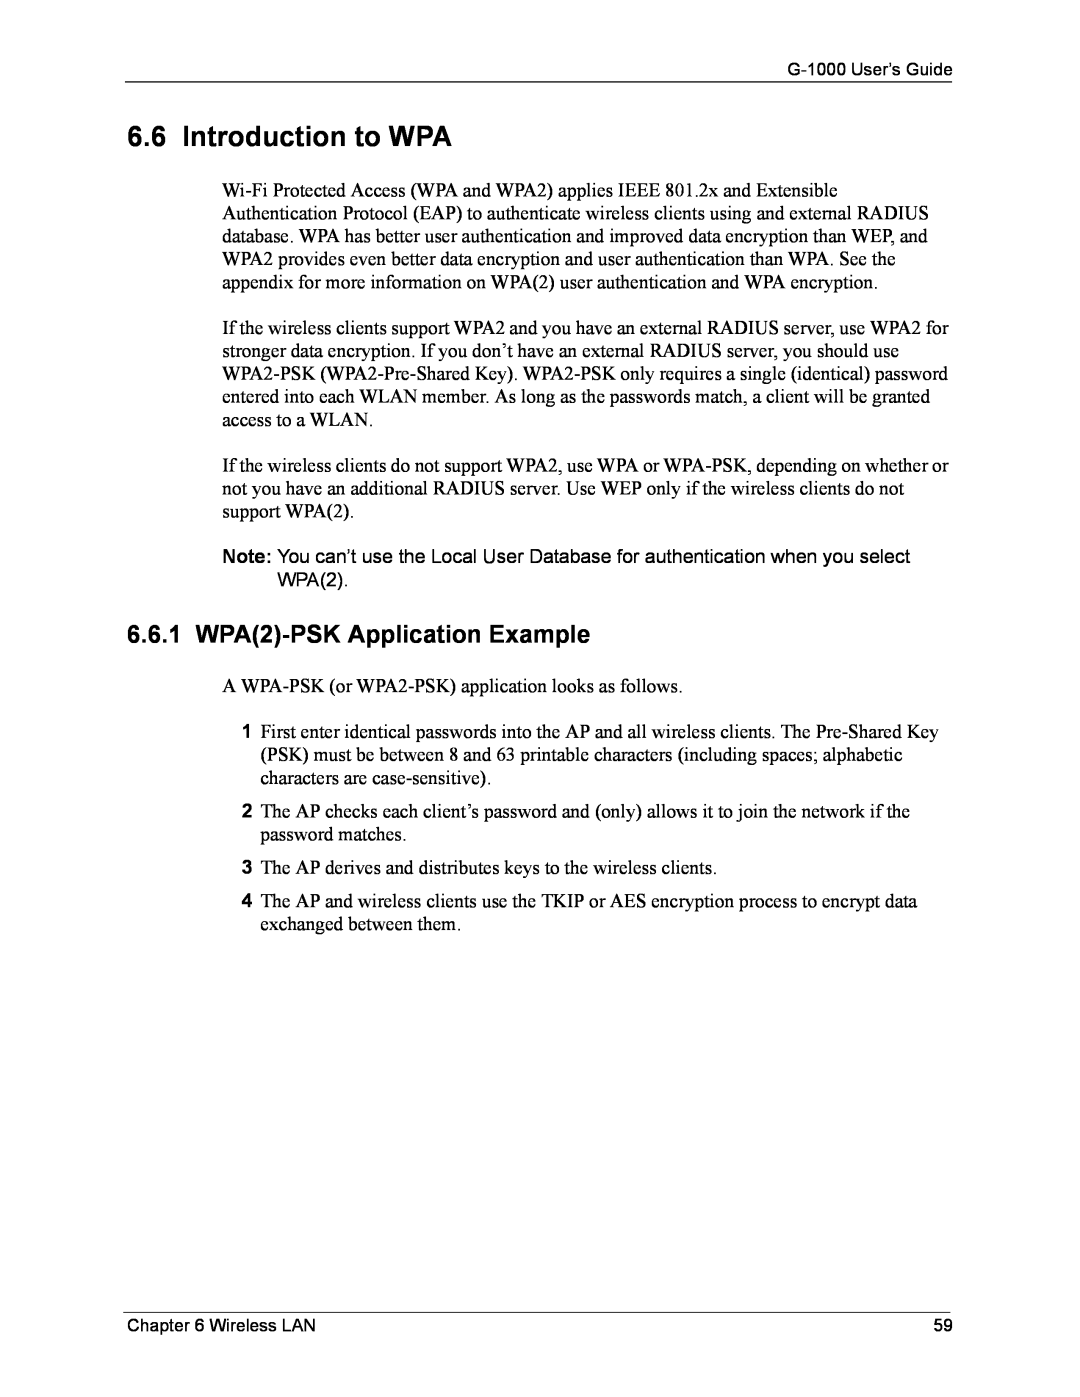 ZyXEL Communications G-1000 manual Introduction to WPA, 6.6.1 WPA2-PSK Application Example 